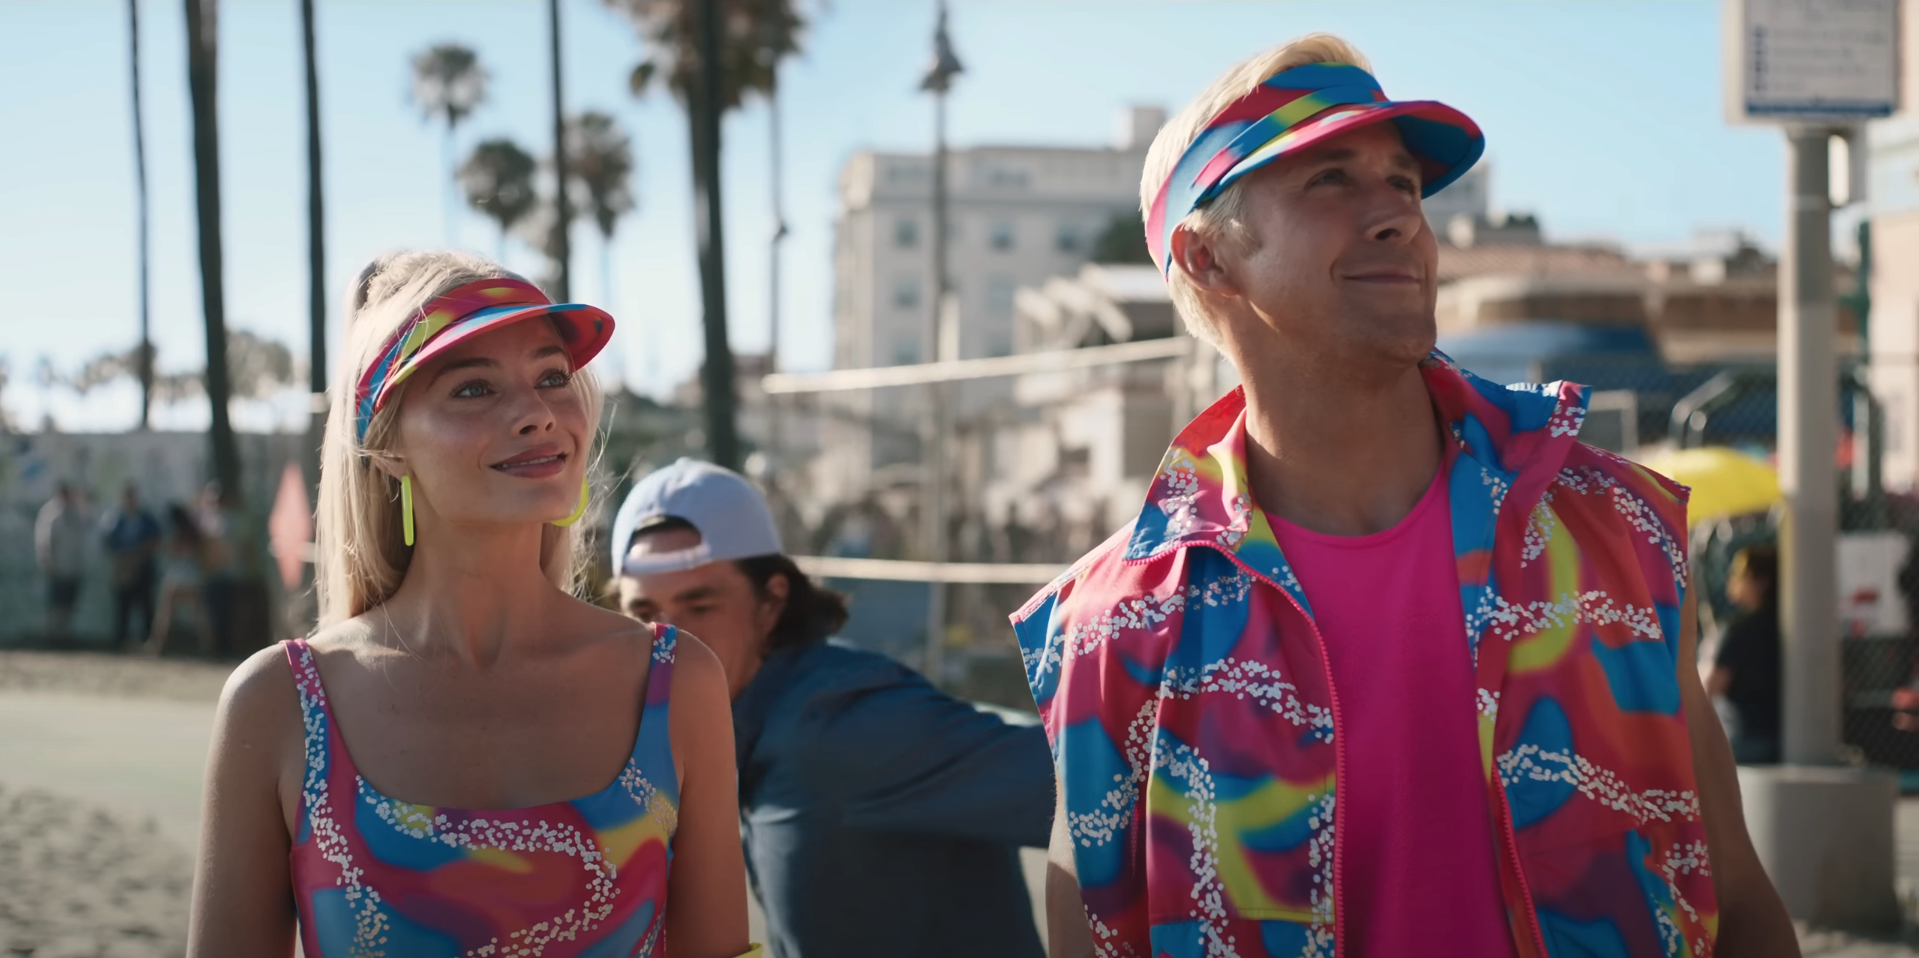 Margot Robbie and Ryan Gosling as Ken rollerblading on the boardwalk in matching outfits and visors in a scene from &quot;Barbie&quot;